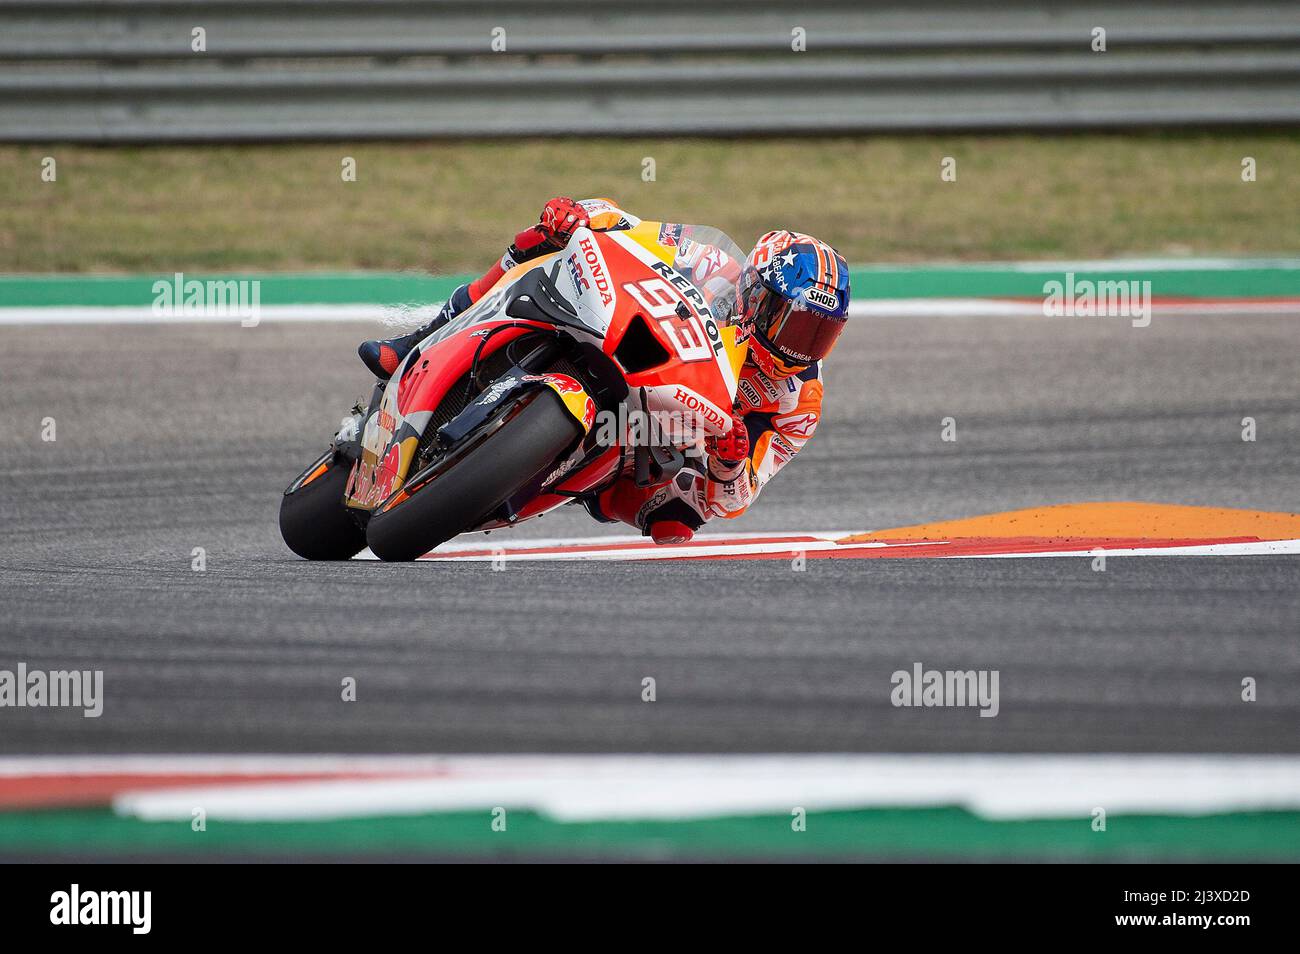 The Americas, Austin, Texas, USA. 10th Apr, 2022. Marc Marquez #93 with  Repsol Honda Team in action warm up at the MotoGP Red Bull Grand Prix of  the Americas, Circuit of The